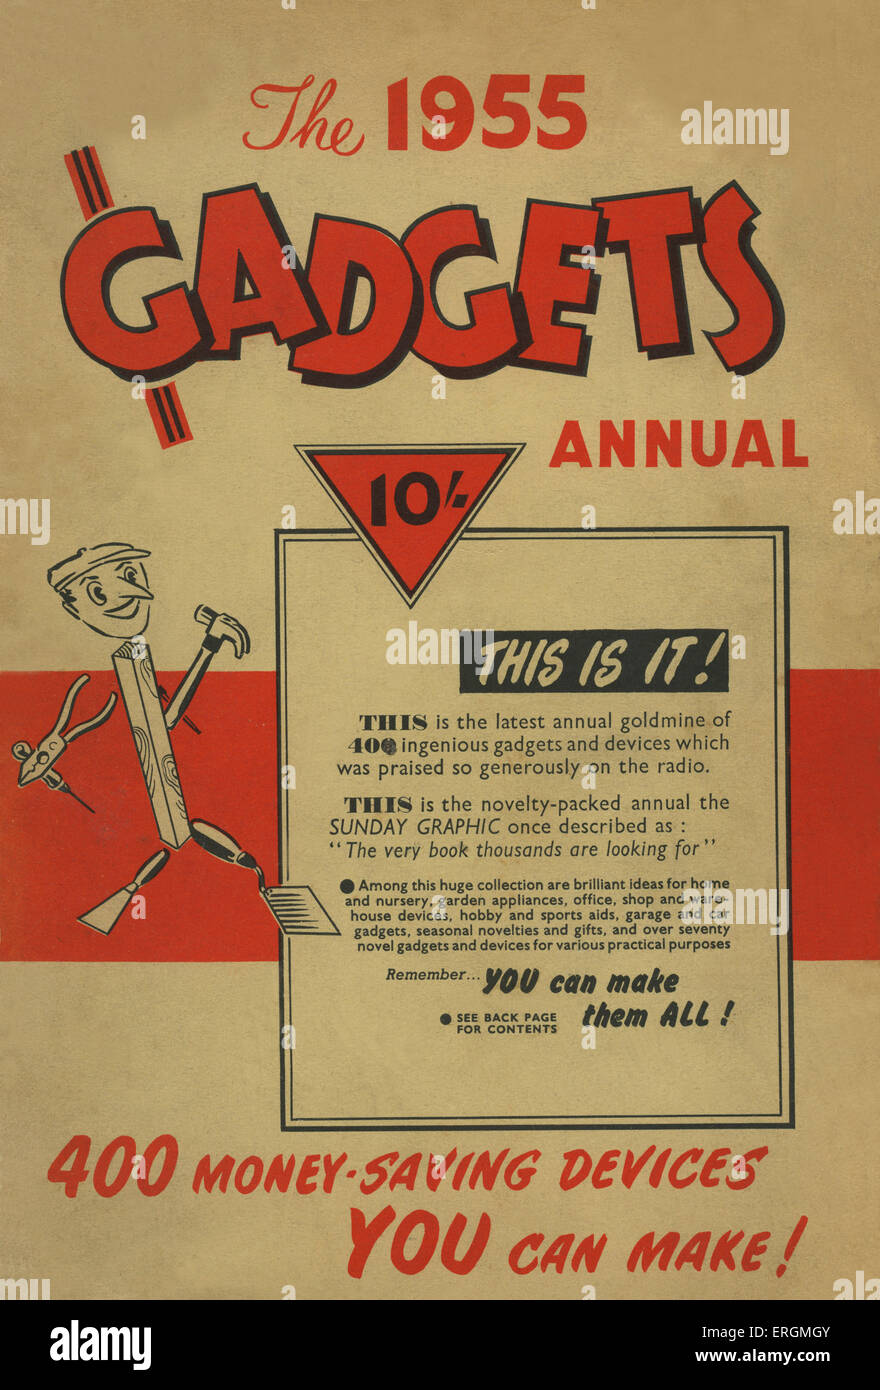 Cover Page - the 1955 Gadgets Annual, including '400 money-saving decides', and claiming to be 'the very book thousands are Stock Photo